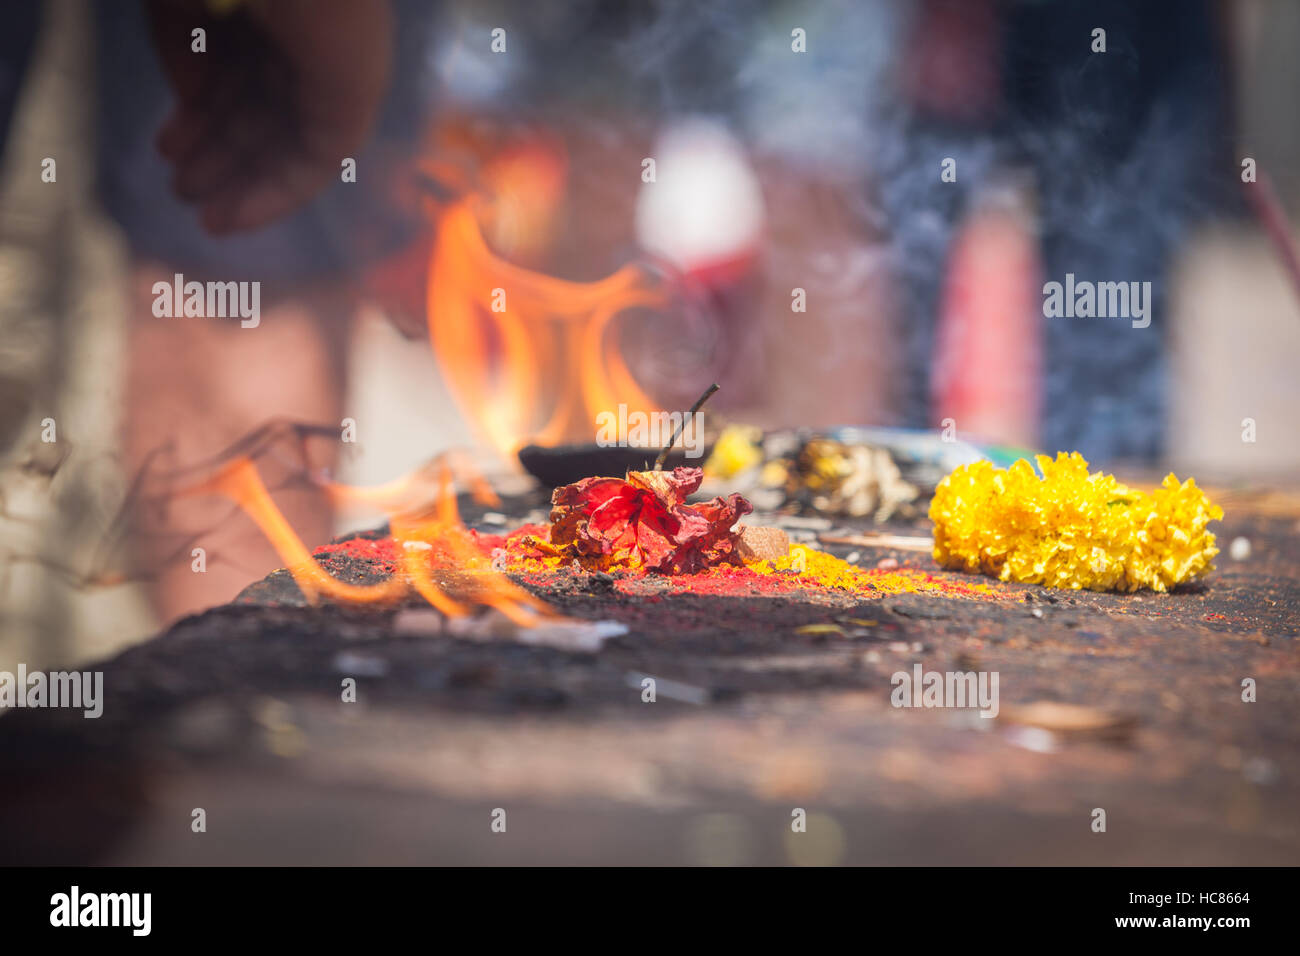 Hindu religious ceremony, near Hospet, India, where flowers and paper is burned before entering the temple nearby. Stock Photo